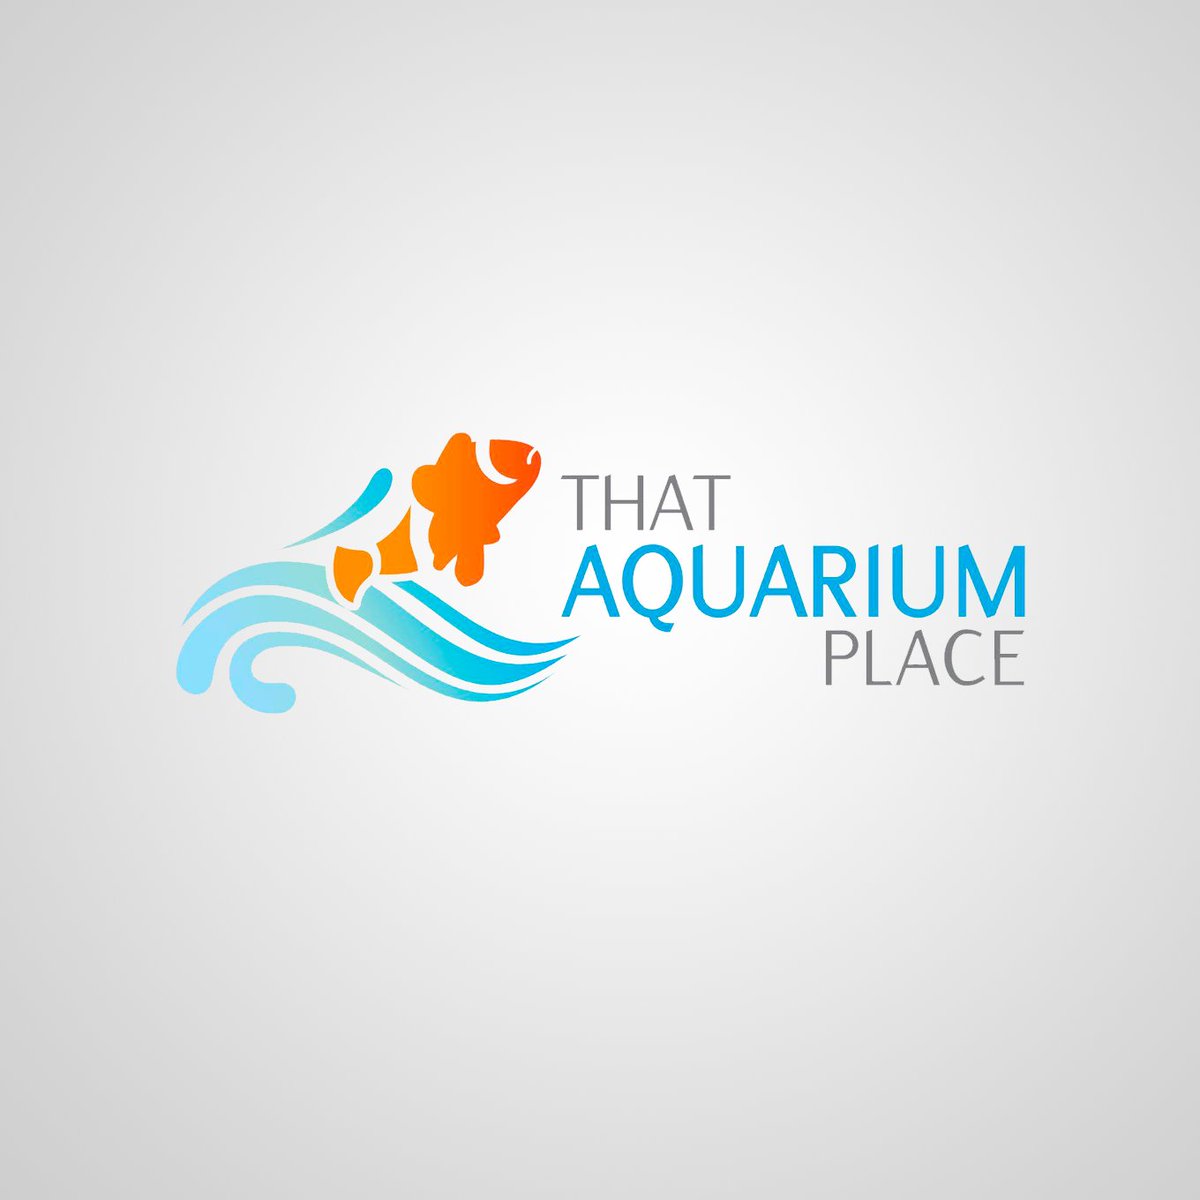 🏬 FEATURED DEALER OF THE MONTH: That Aquarium Place (Spring, TX)

A well-known mainstay for a variety of freshwater and saltwater tropical fish and equipment, That Aquarium Place in Spring, TX is this month’s featured dealer!

For details, please: ThatAquariumPlace.com